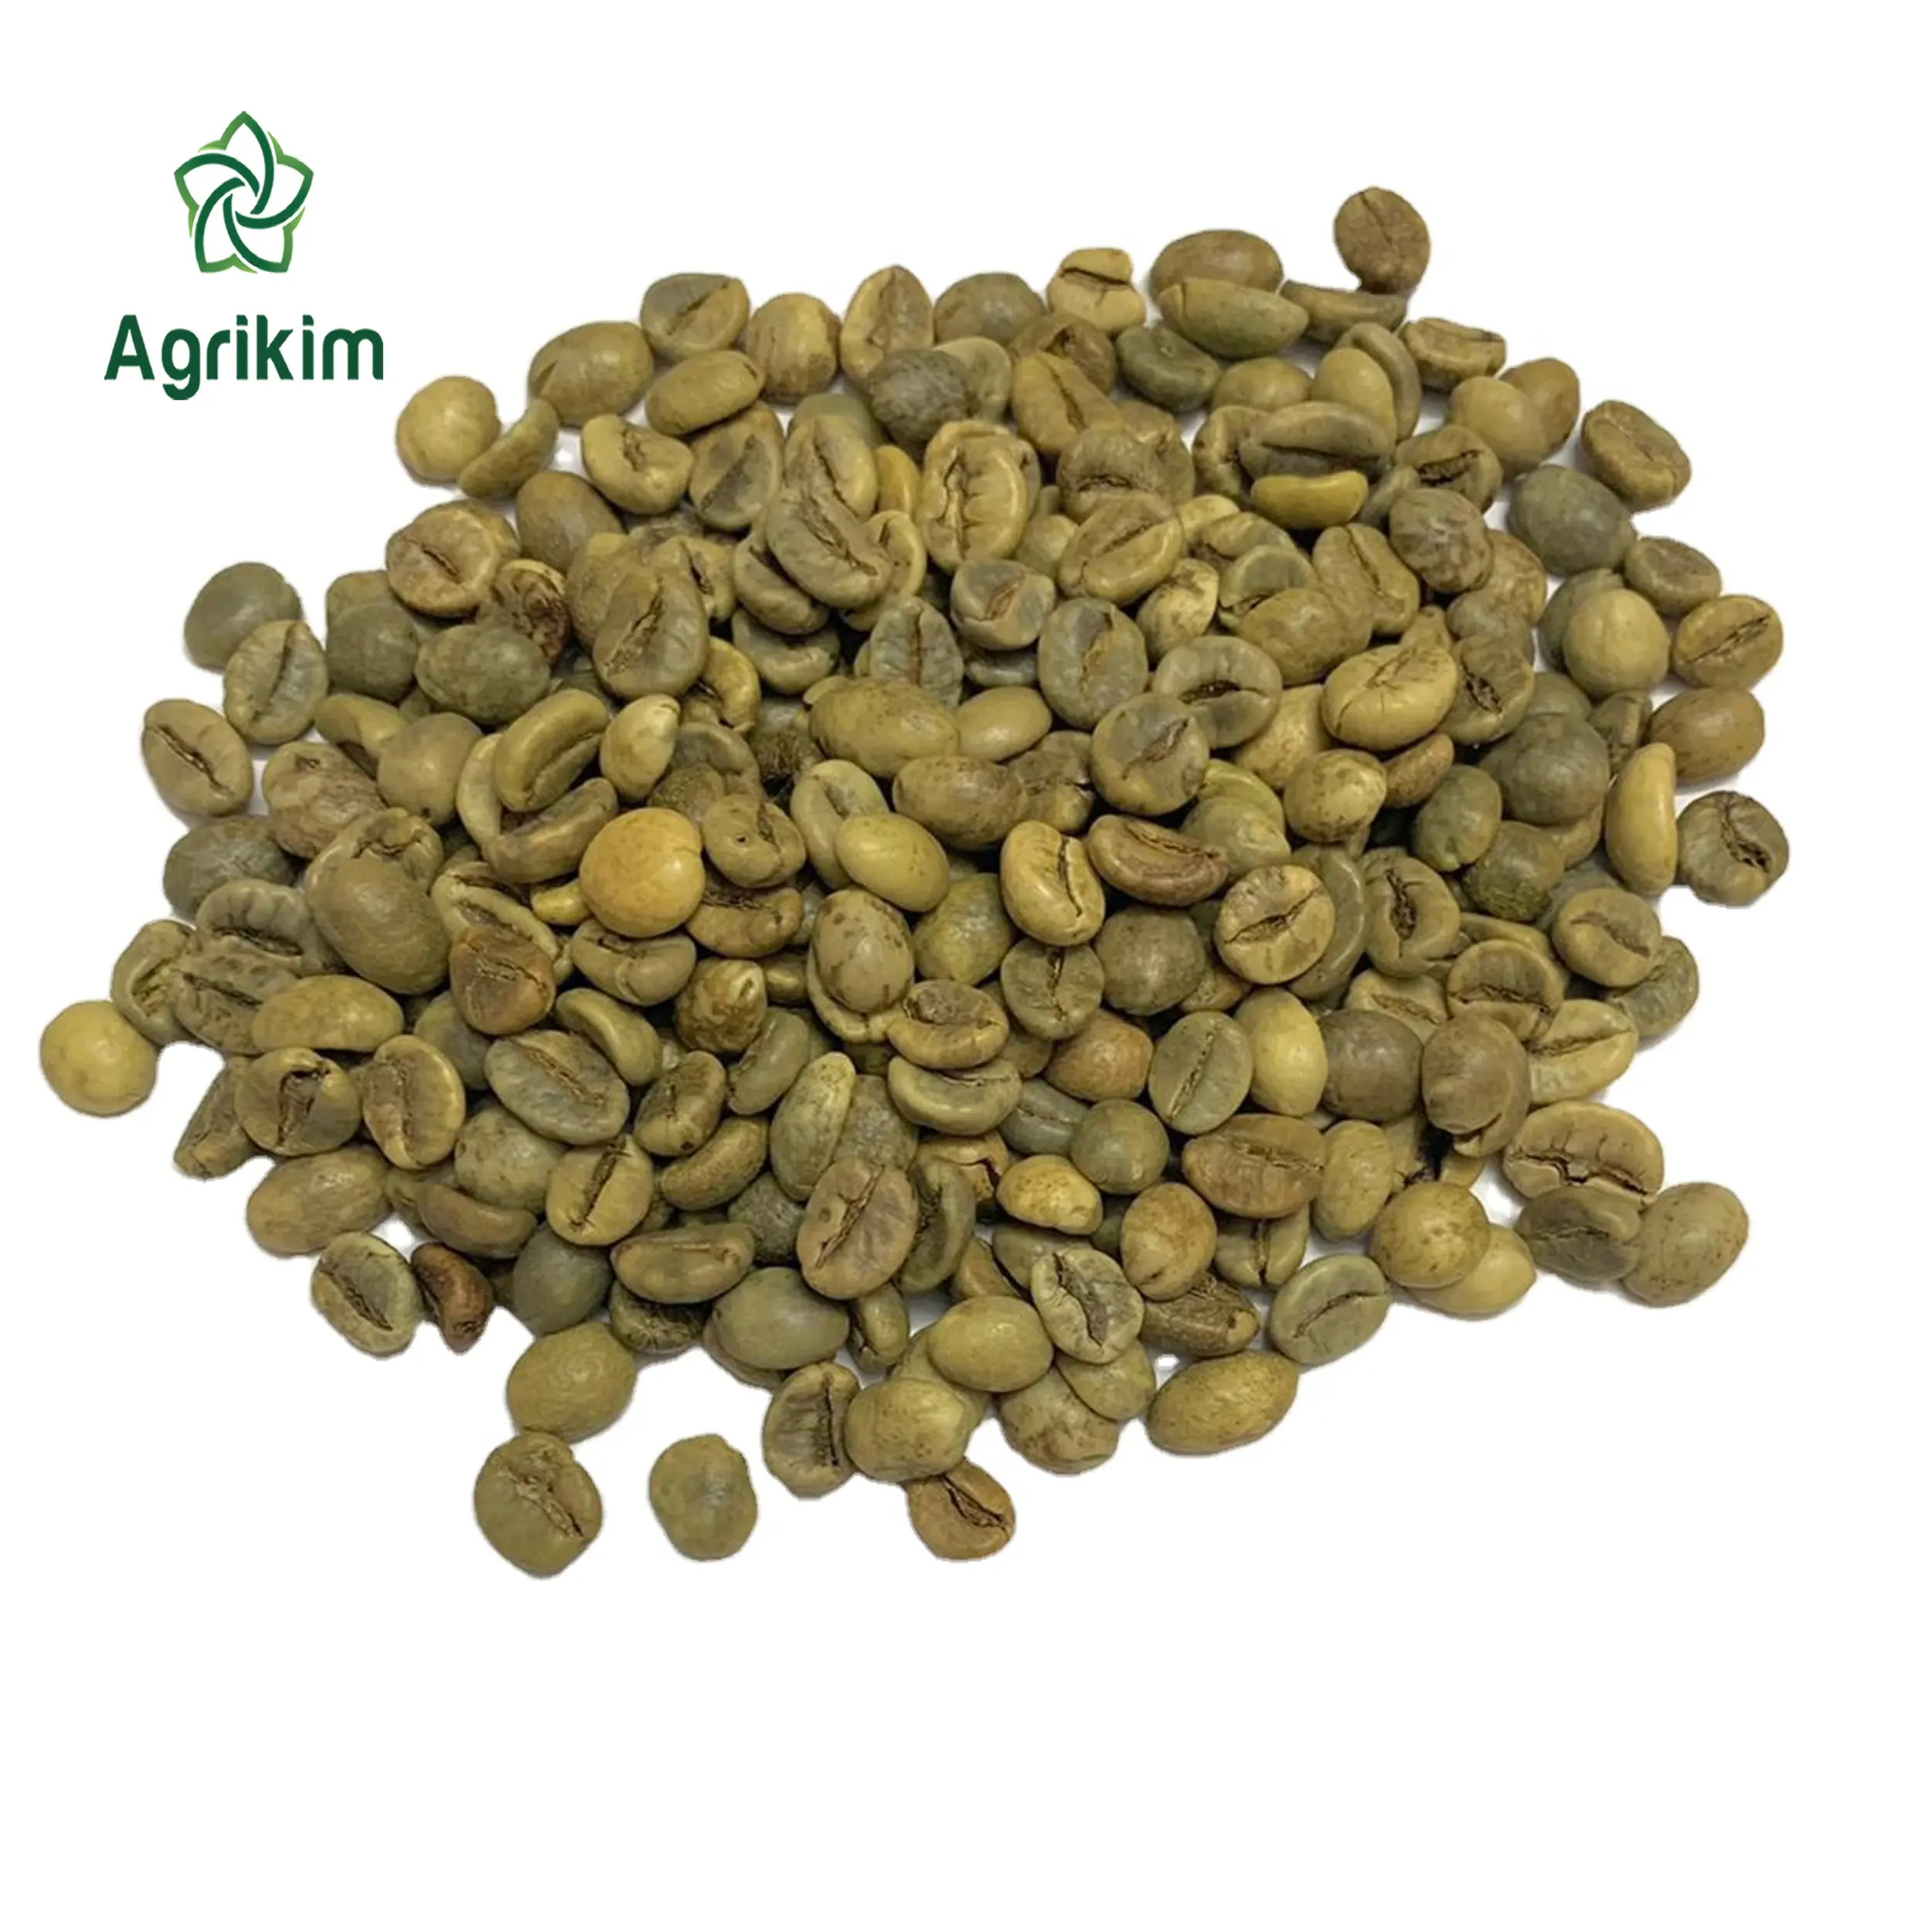 [Top 1 supplier] Fully certified Robusta green bean coffee/Arabica green coffee beans from Vietnam origin and high quality